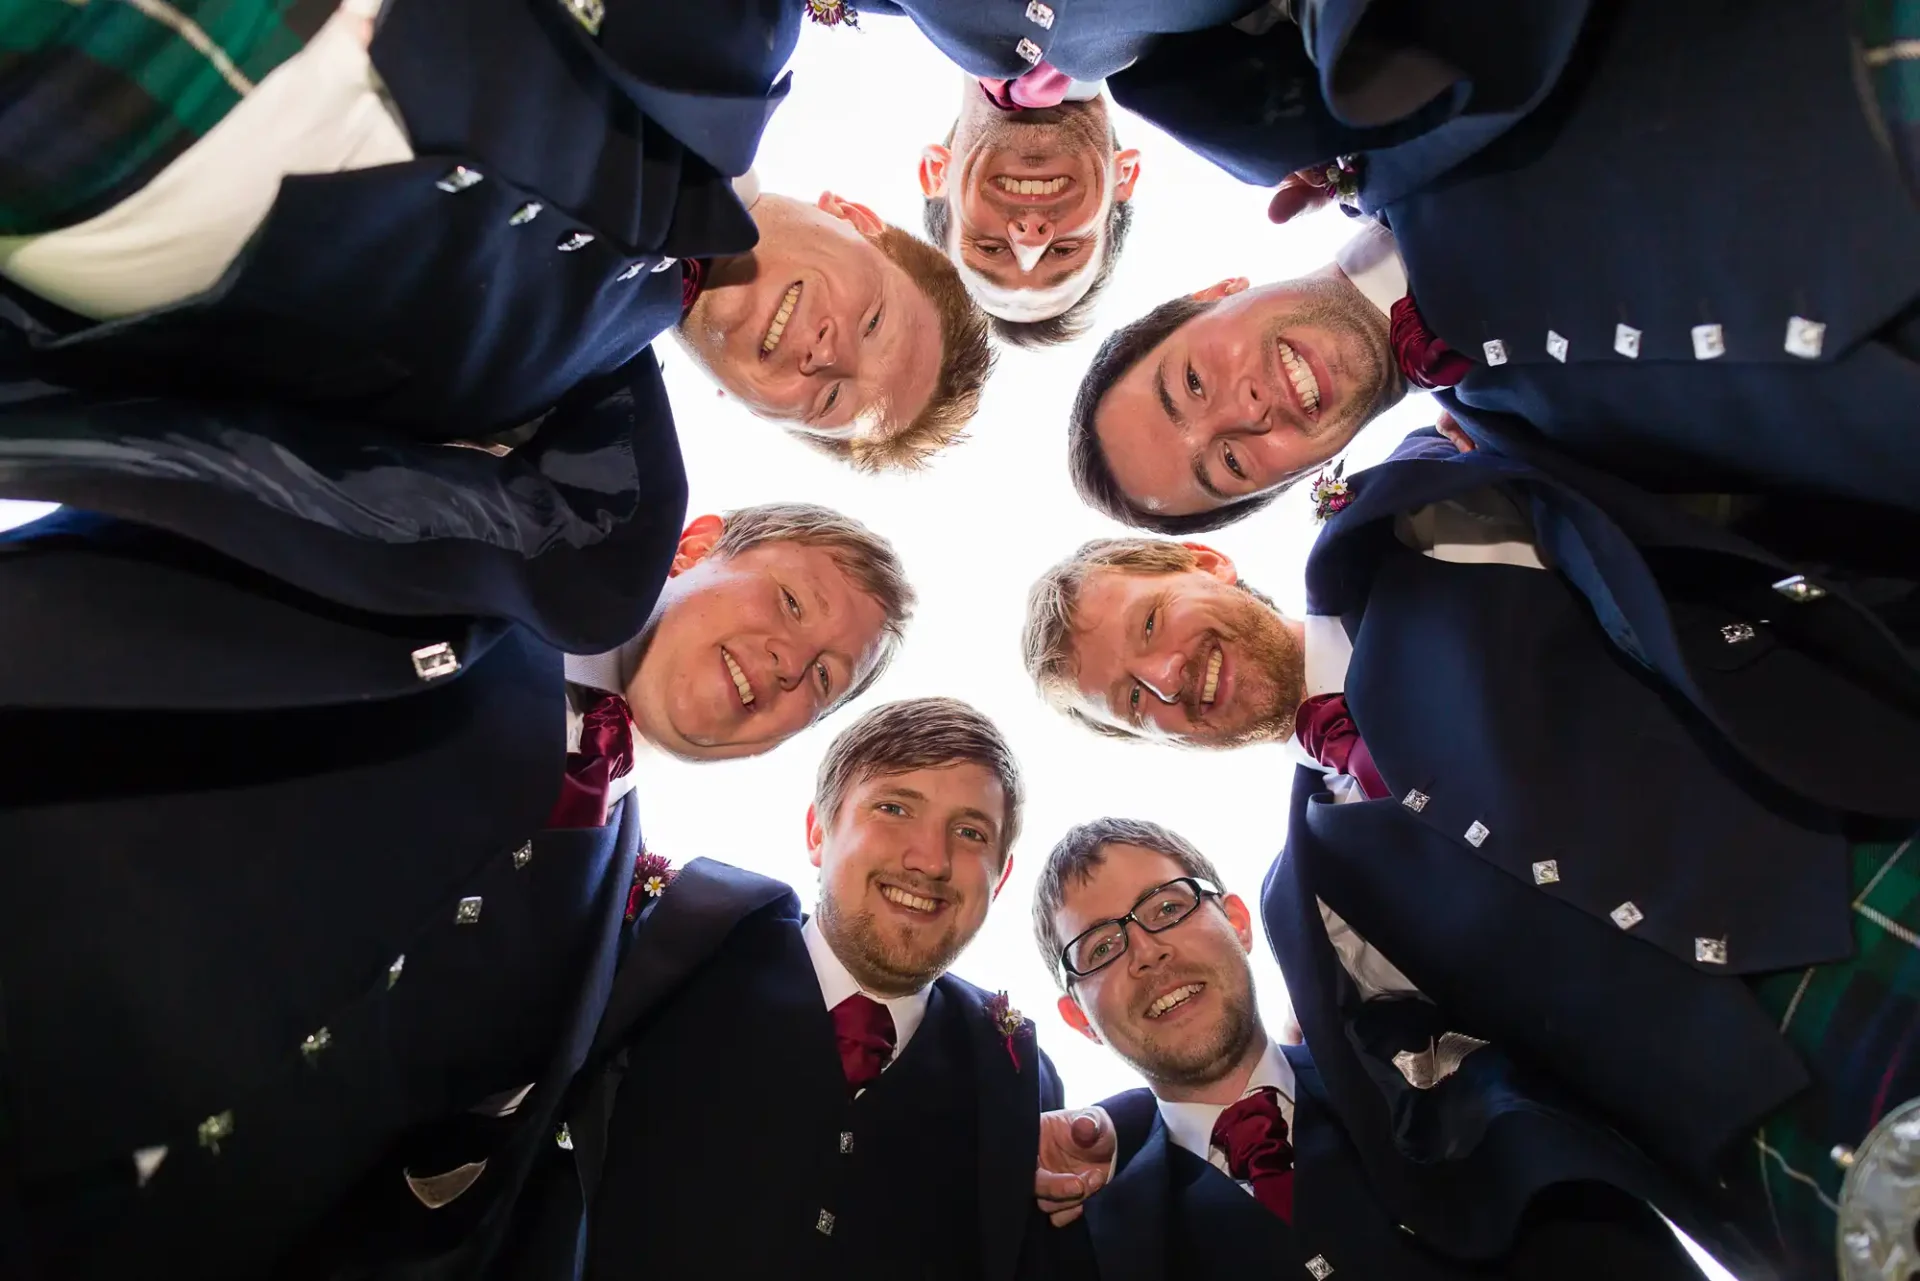 Group of six men in kilts and formal jackets smiling down at the camera, viewed from a low angle.